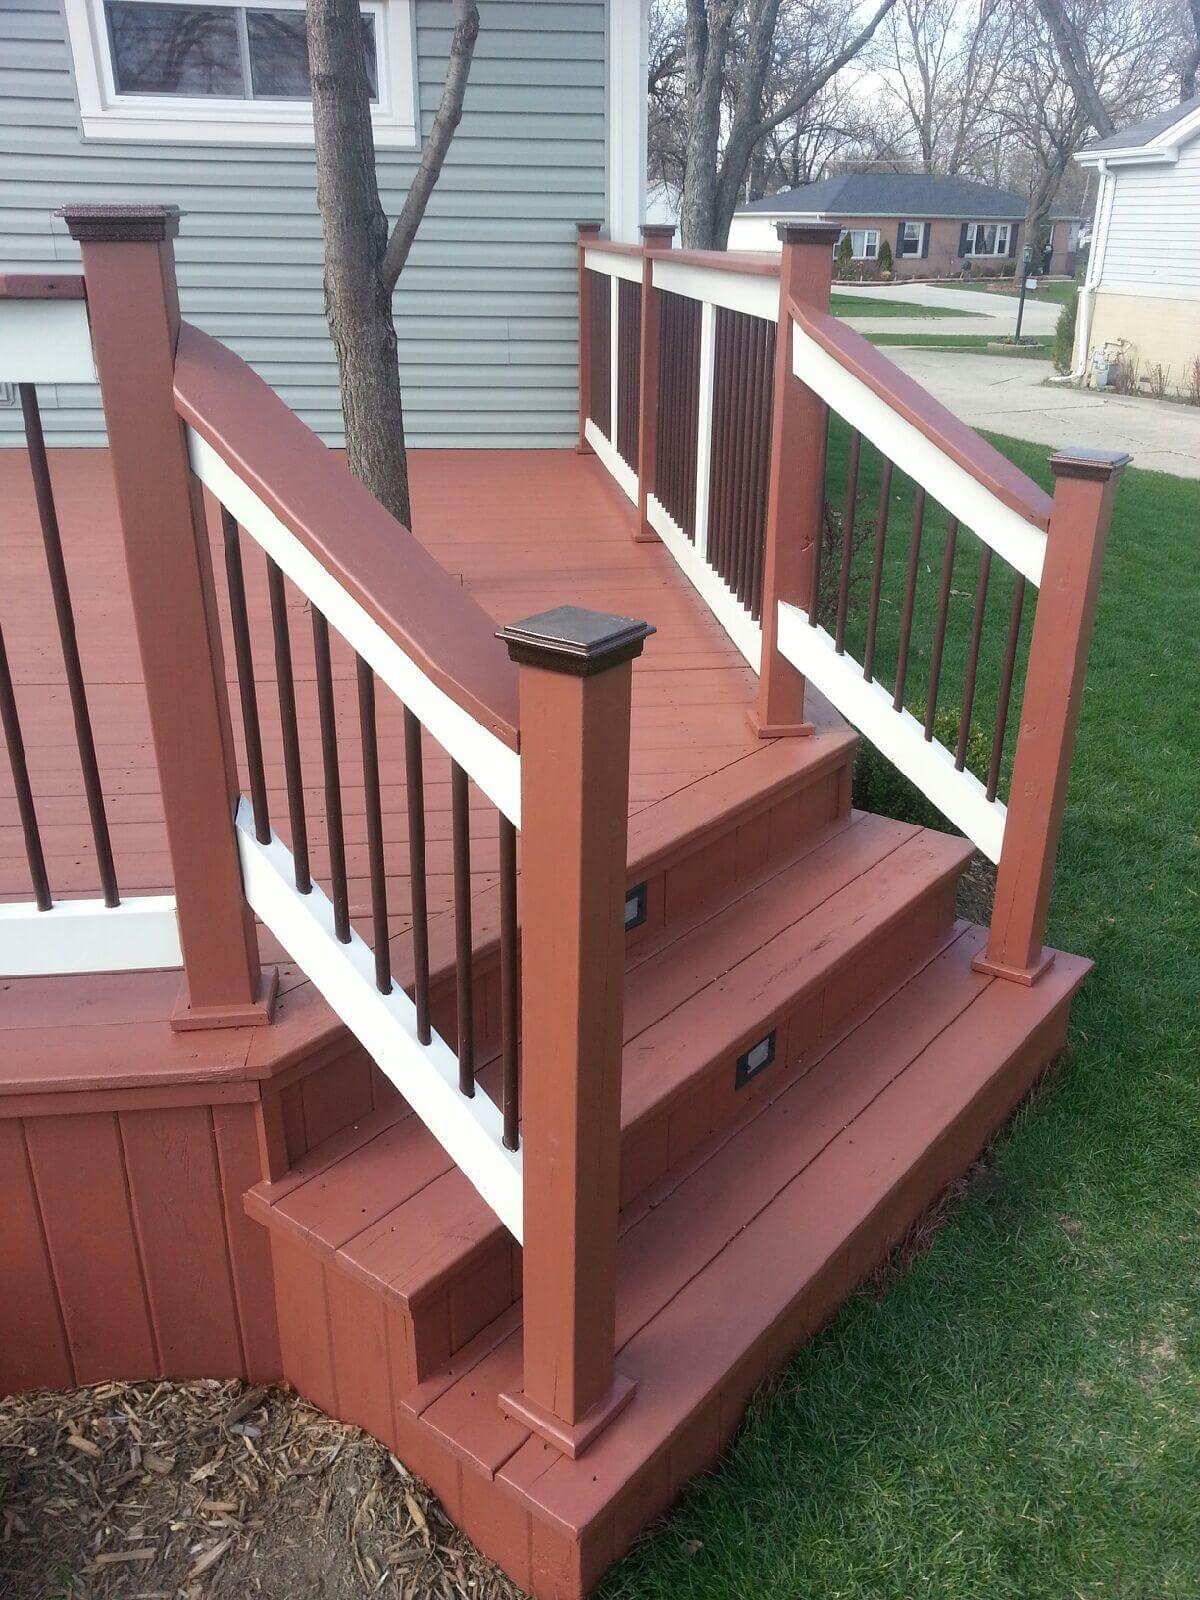 Repairs and maintenance for your deck, fence, and exterior wood staining. - Deck Staining Spring Grove - Deck Cleaning Services